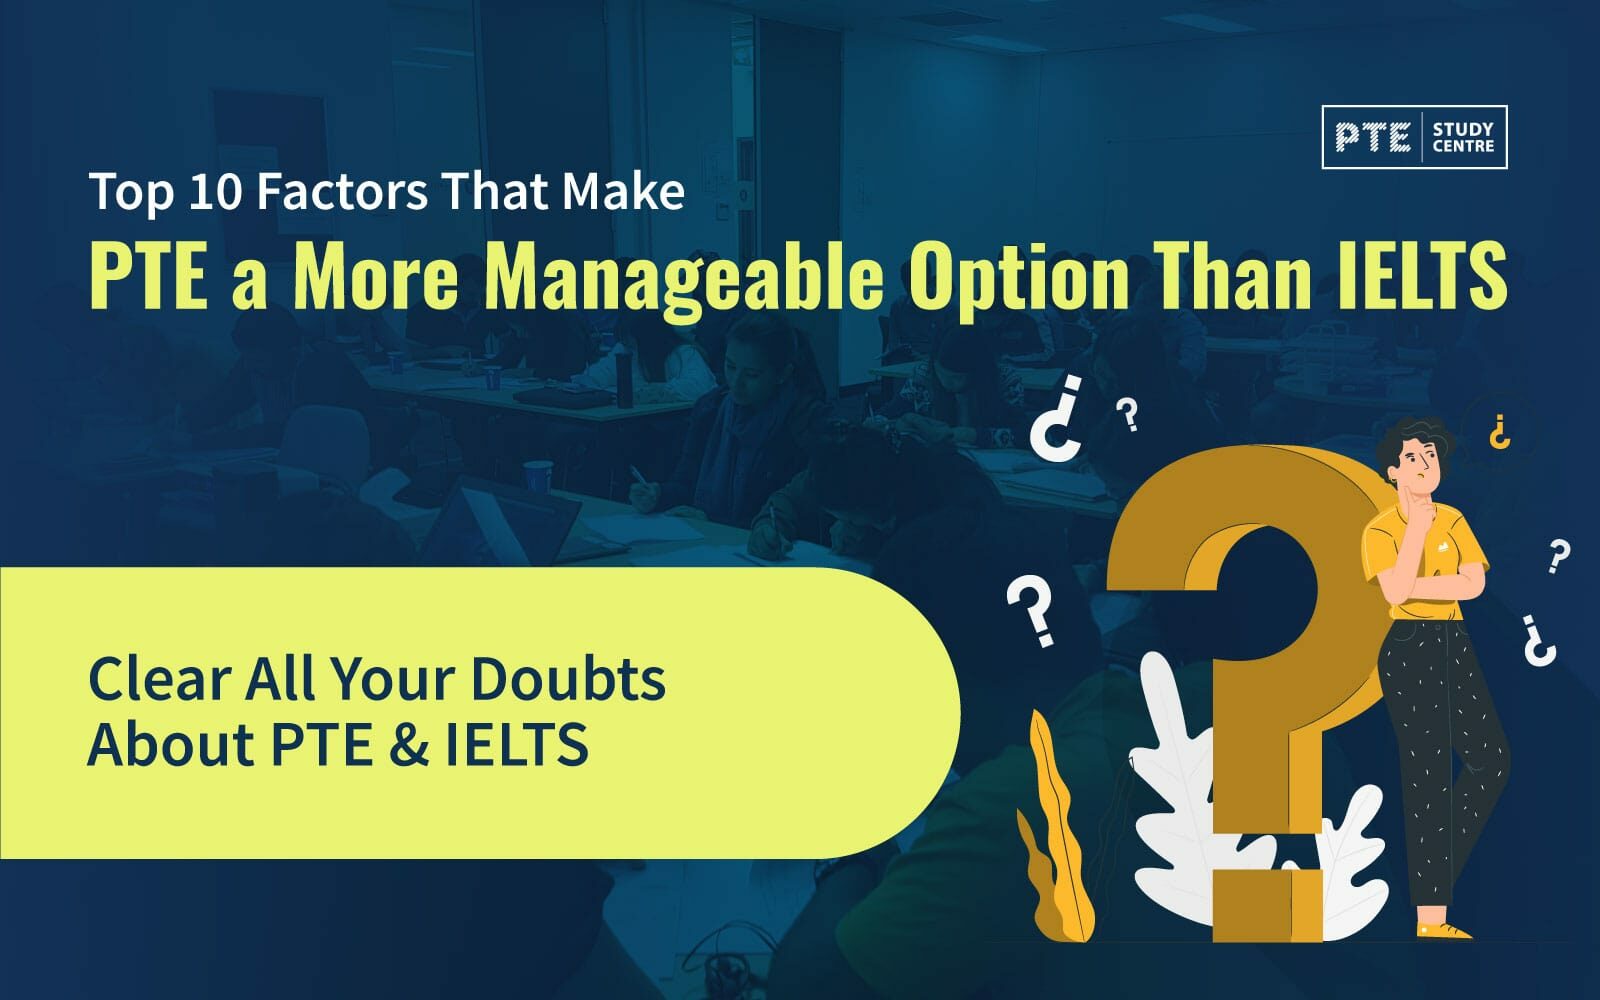 Top 10 Factors That Make PTE a More Manageable Option Than IELTS